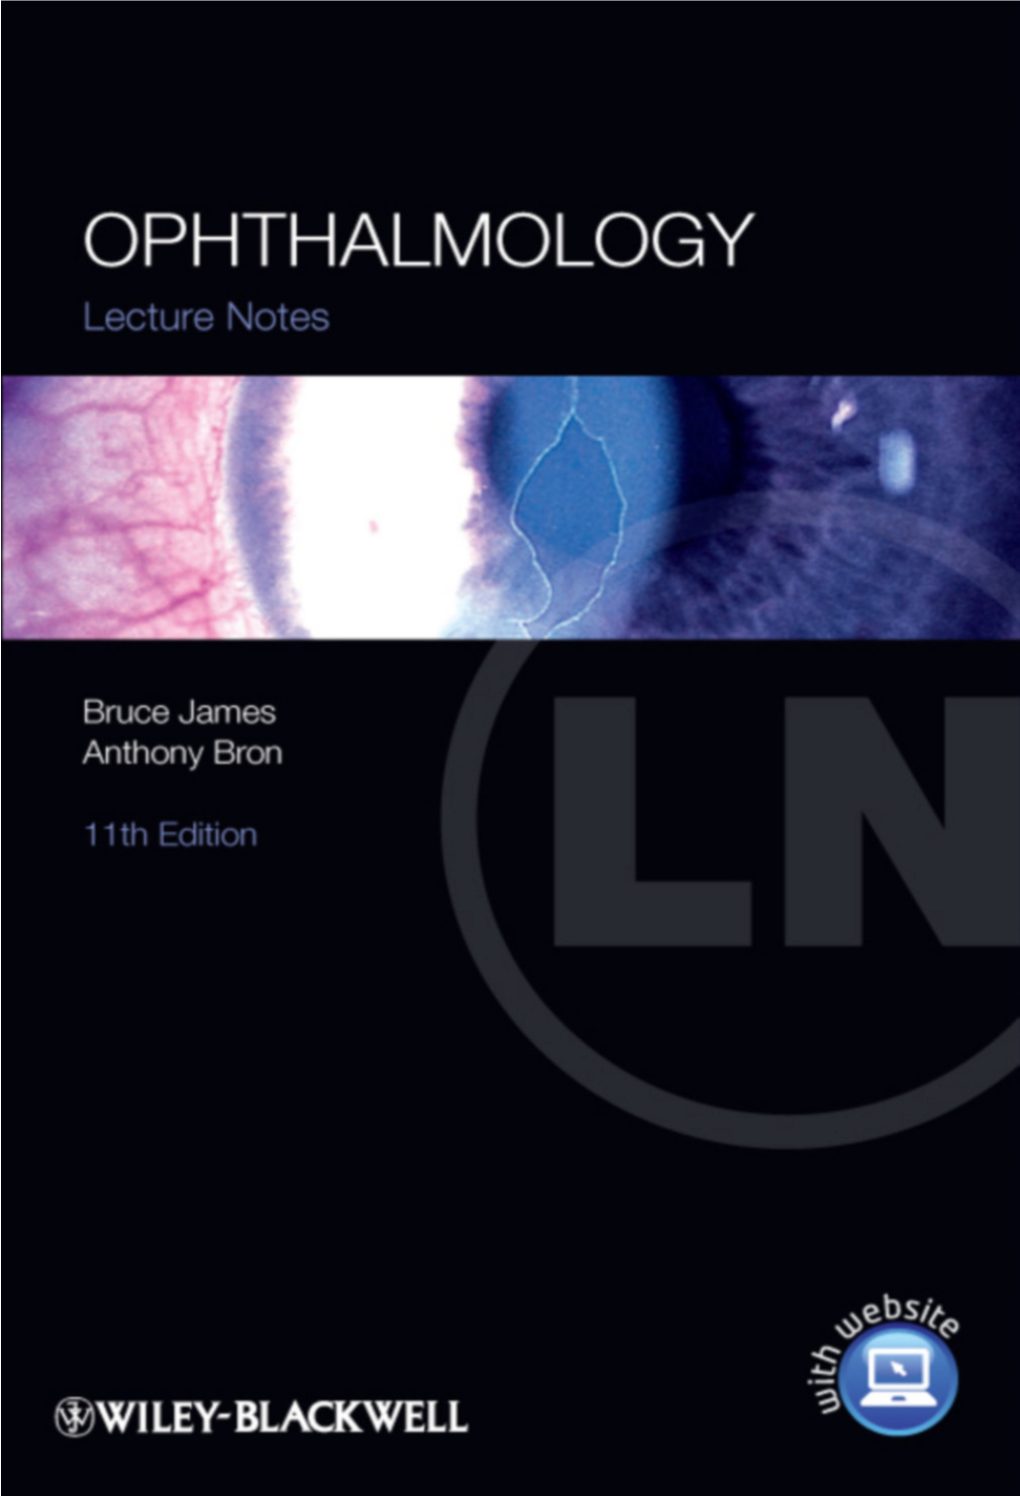 Lecture Notes: Ophthalmology